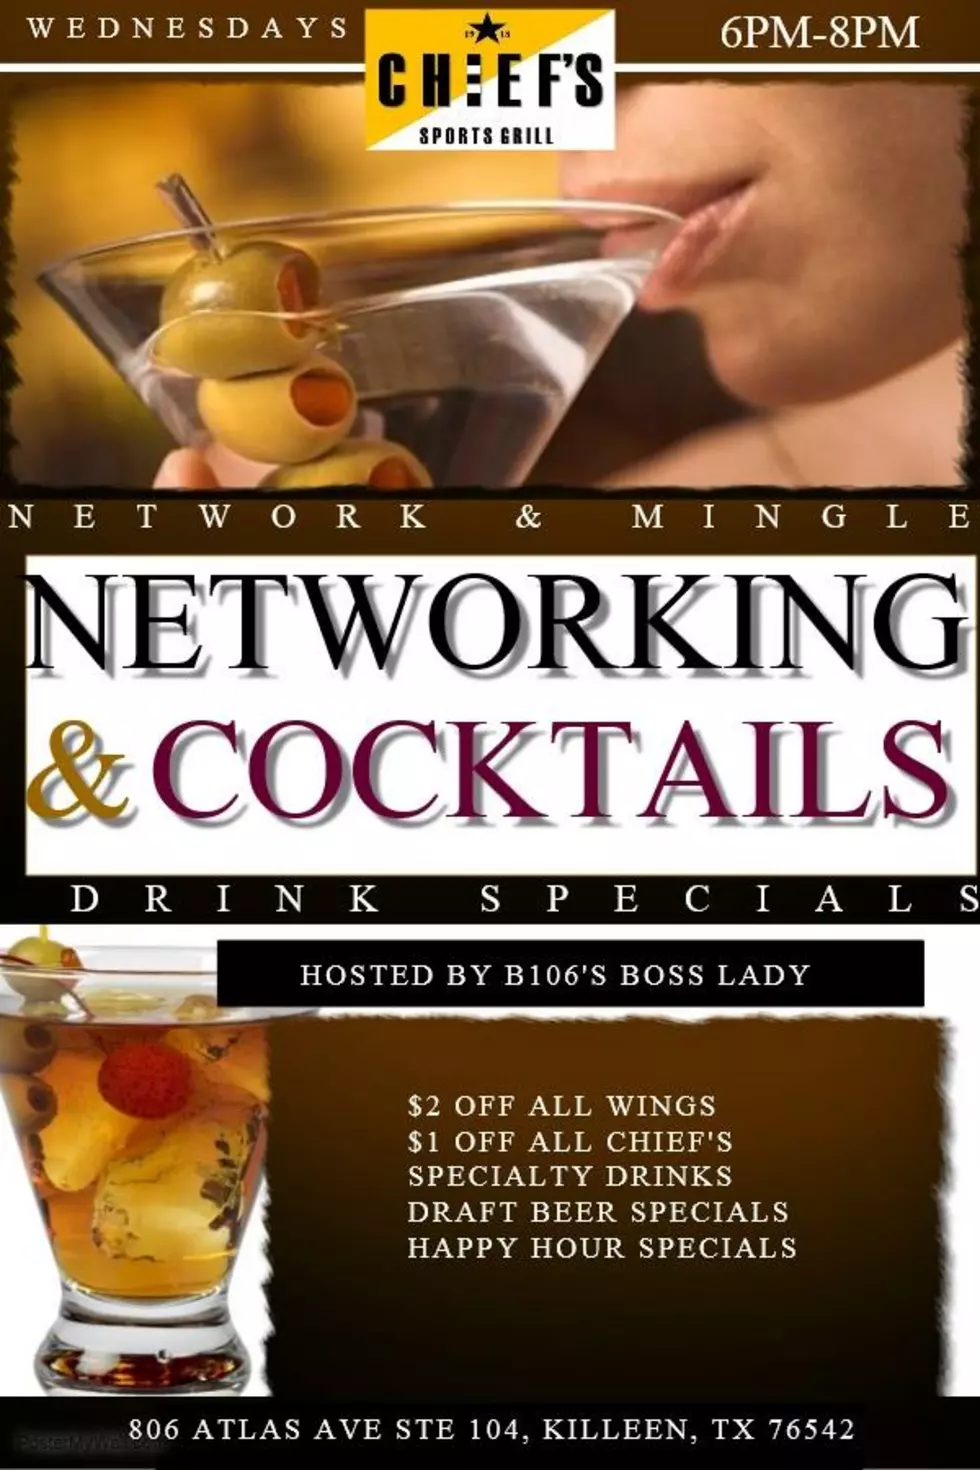 Network and Mingle With BossLady Every Wednesday